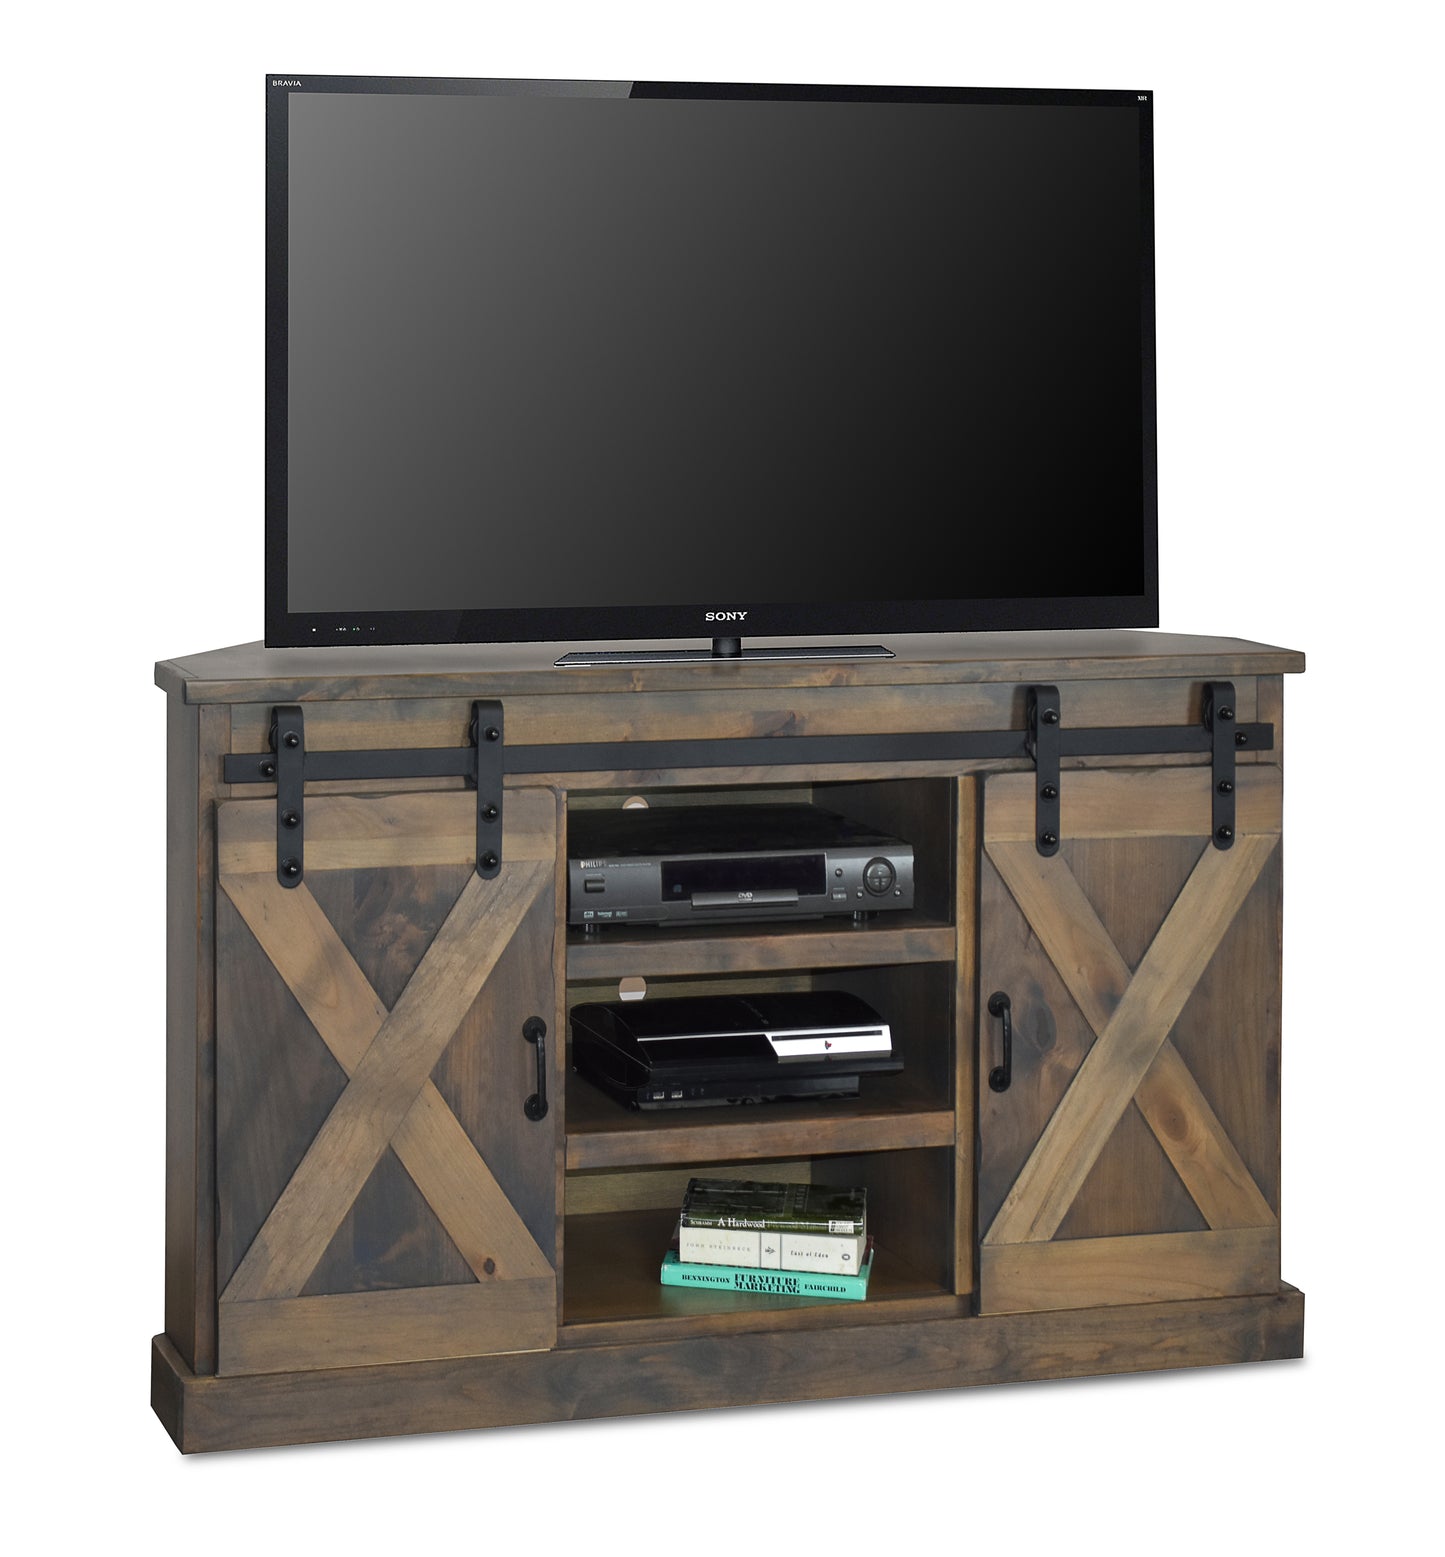 Bridgevine Home Farmhouse 56 inch Corner TV Stand for TVs up to 60 inches, No Assembly Required, Barnwood Finish